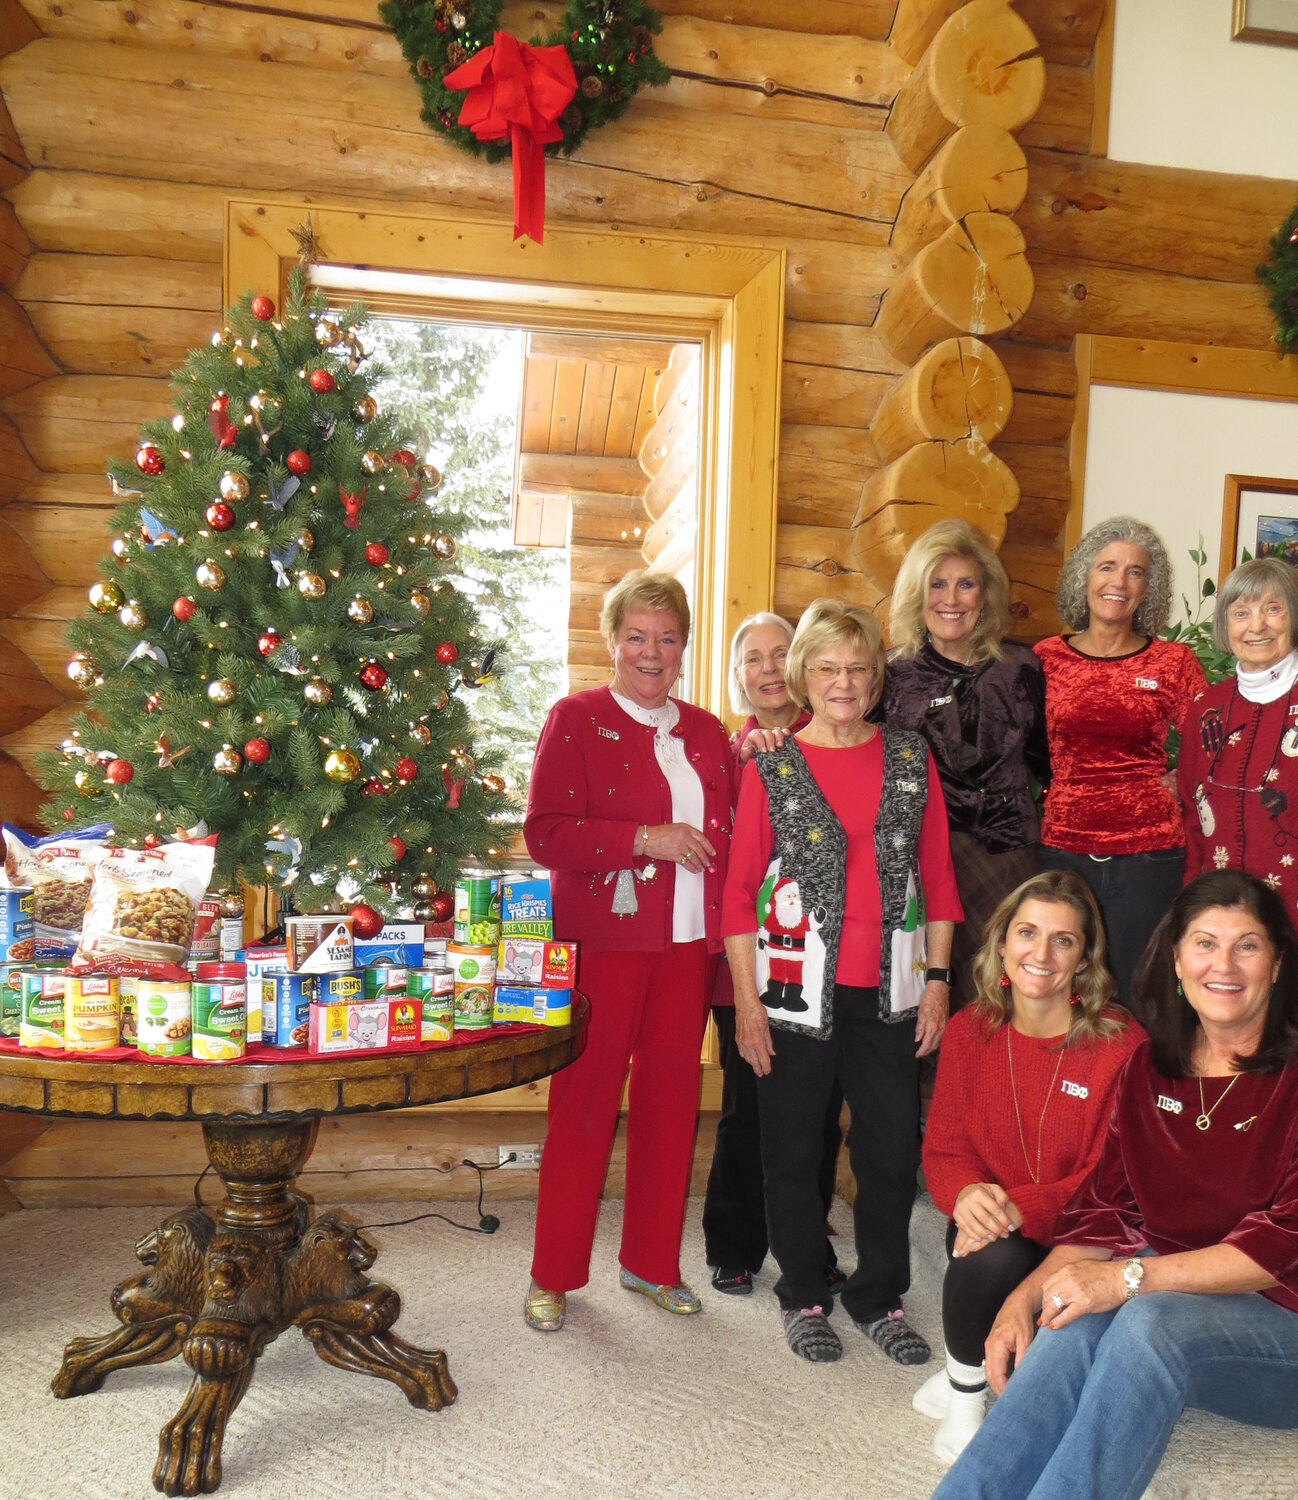 Local Pi Beta Phi sorority alumnae gathered at the home of Carole Howard on Dec. 1 for their annual Christmas angel potluck luncheon. Posing with a tiny fraction of the 200 pounds of food they donated to Healthy Archuleta’s food distribution center for community food banks are, standing left to right: Carole Howard, Mary Rothchild, Melissa McDonald, Paula Tennant, Ann Bubb and Mary Bailly. Seated, left to right, are Kelly Maestas and Lisa Scott. The ladies also donated toiletries to Rise Above Violence, a local social service organization supporting domestic violence victims. The festive holiday event also included an angel gift exchange. Pi Beta Phi, founded in 1867, is the oldest national sorority in the U.S. Today there are 135 collegiate chapters in the U.S. and nearly 300 alumnae clubs around the world.